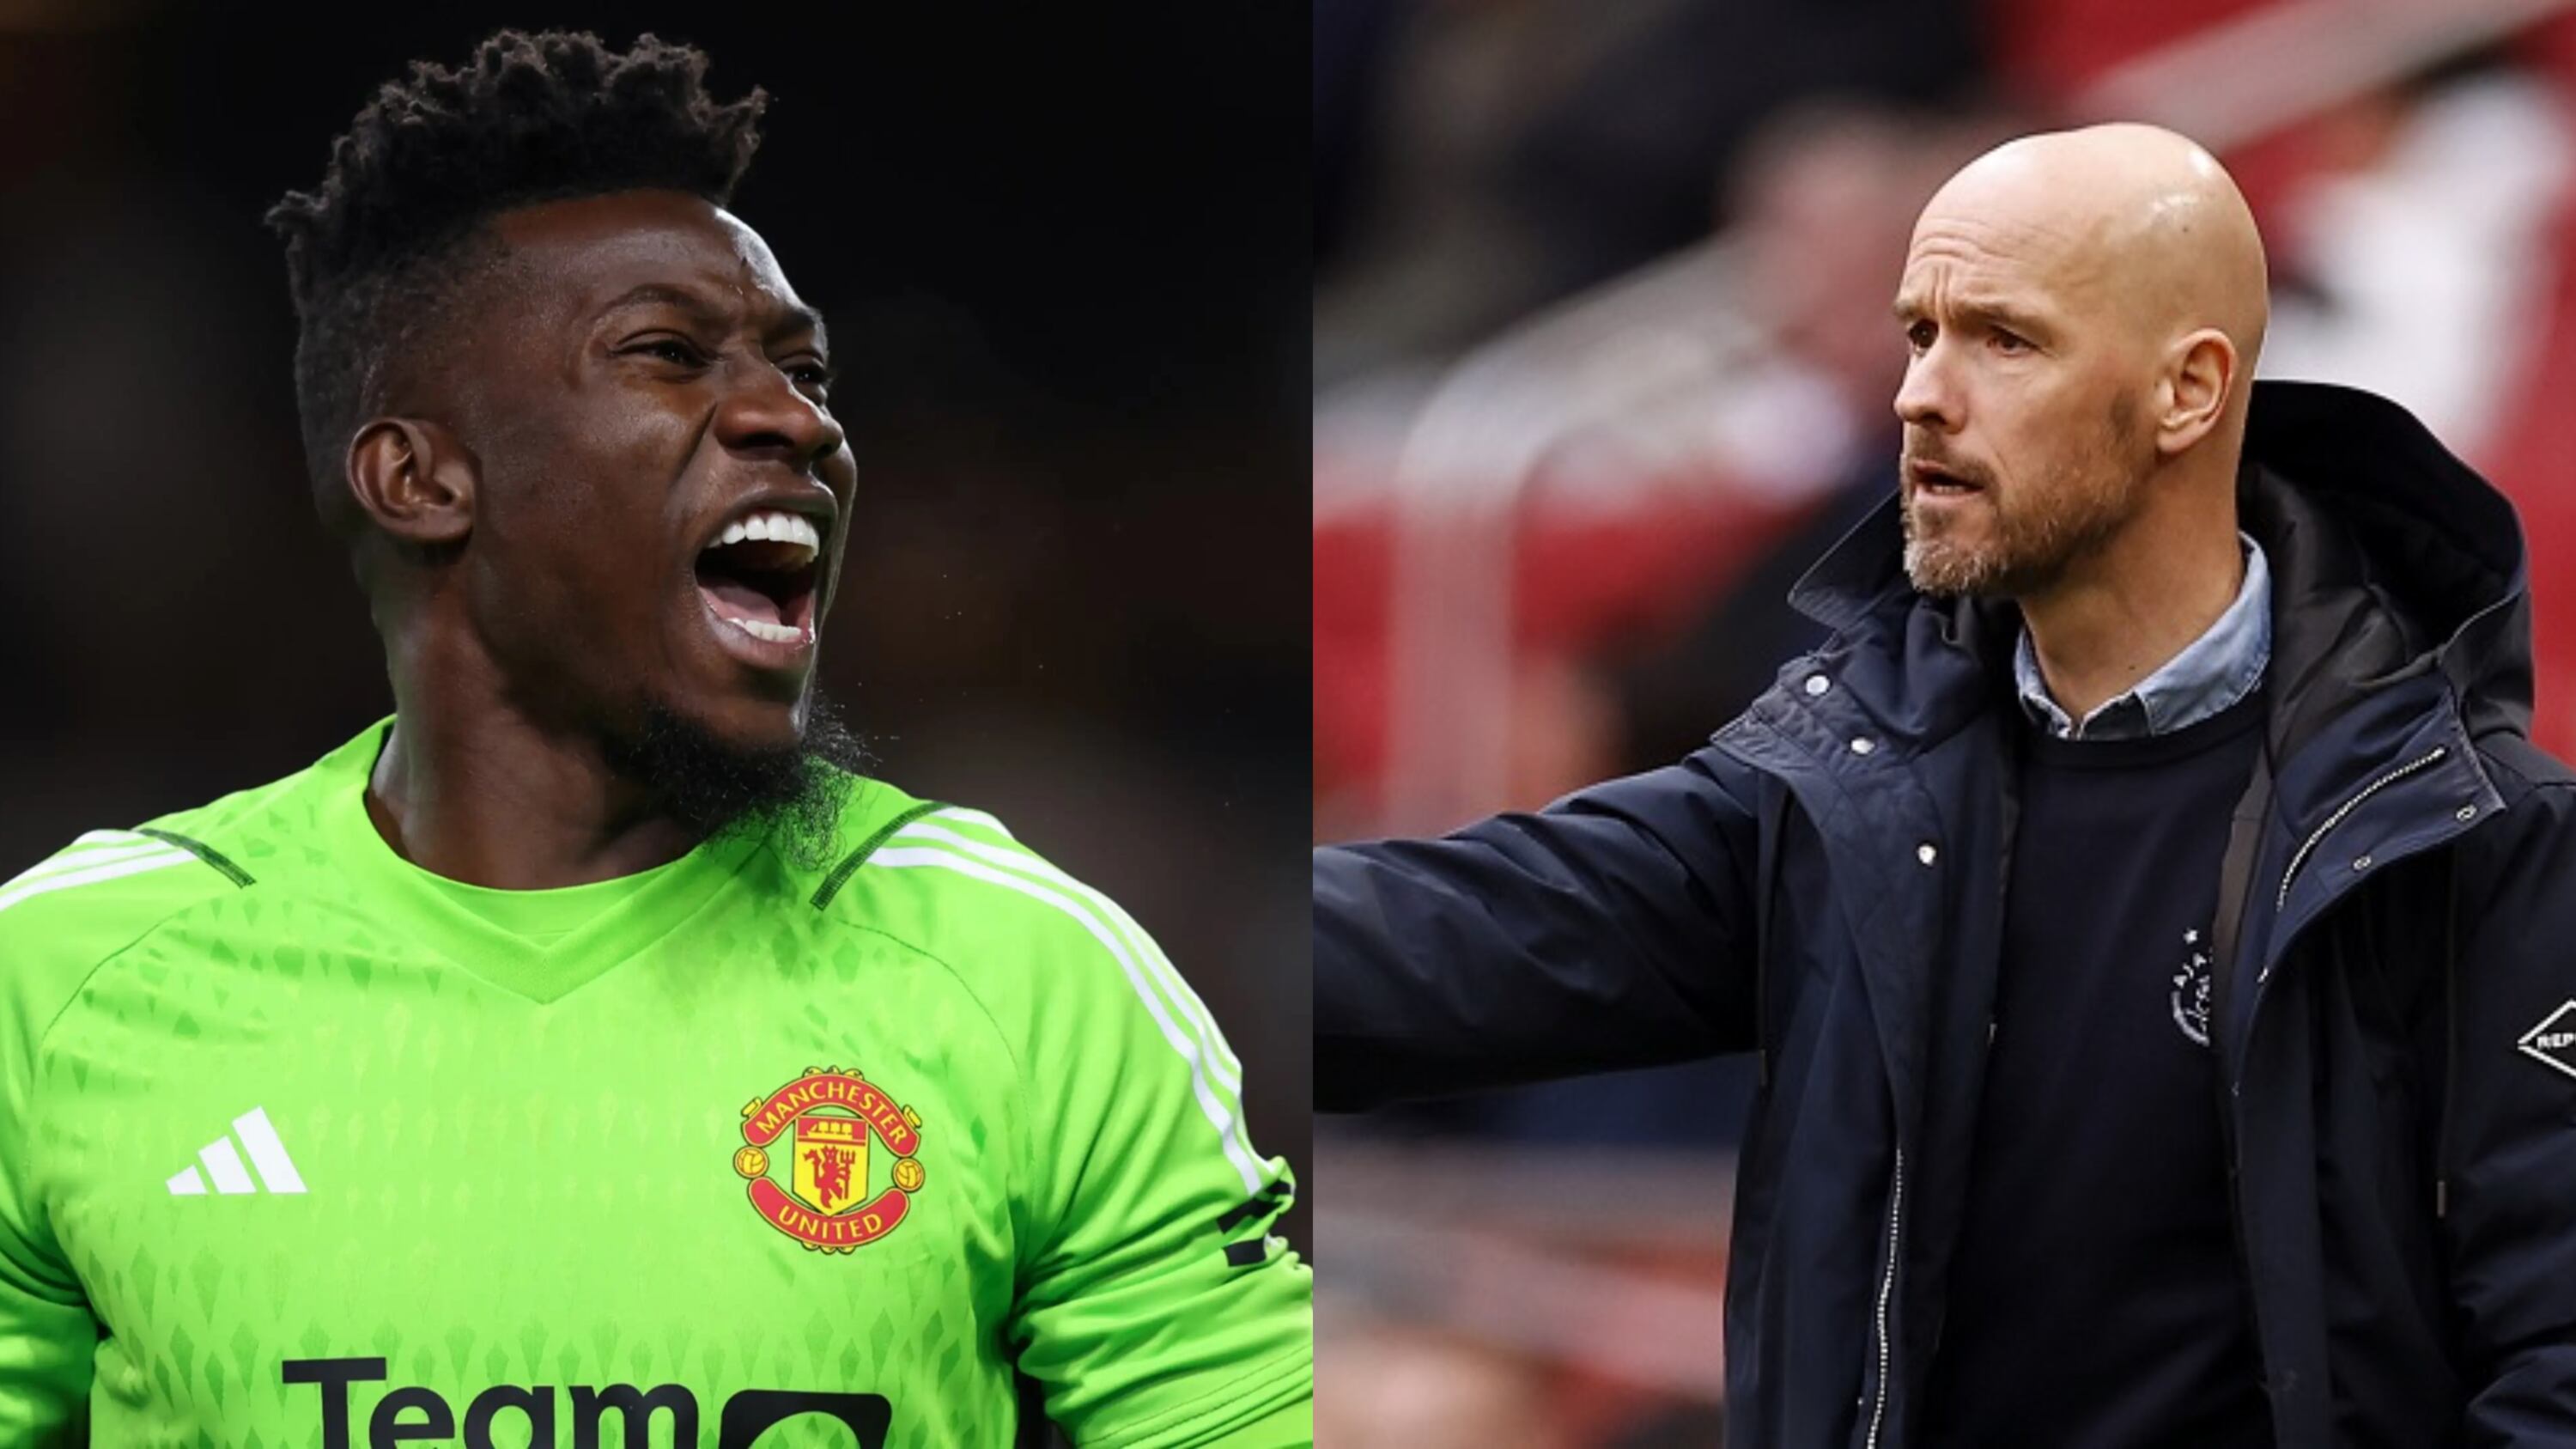 Neither De Gea nor Kepa, the goalkeeper that Manchester United would sign after Onana's failure